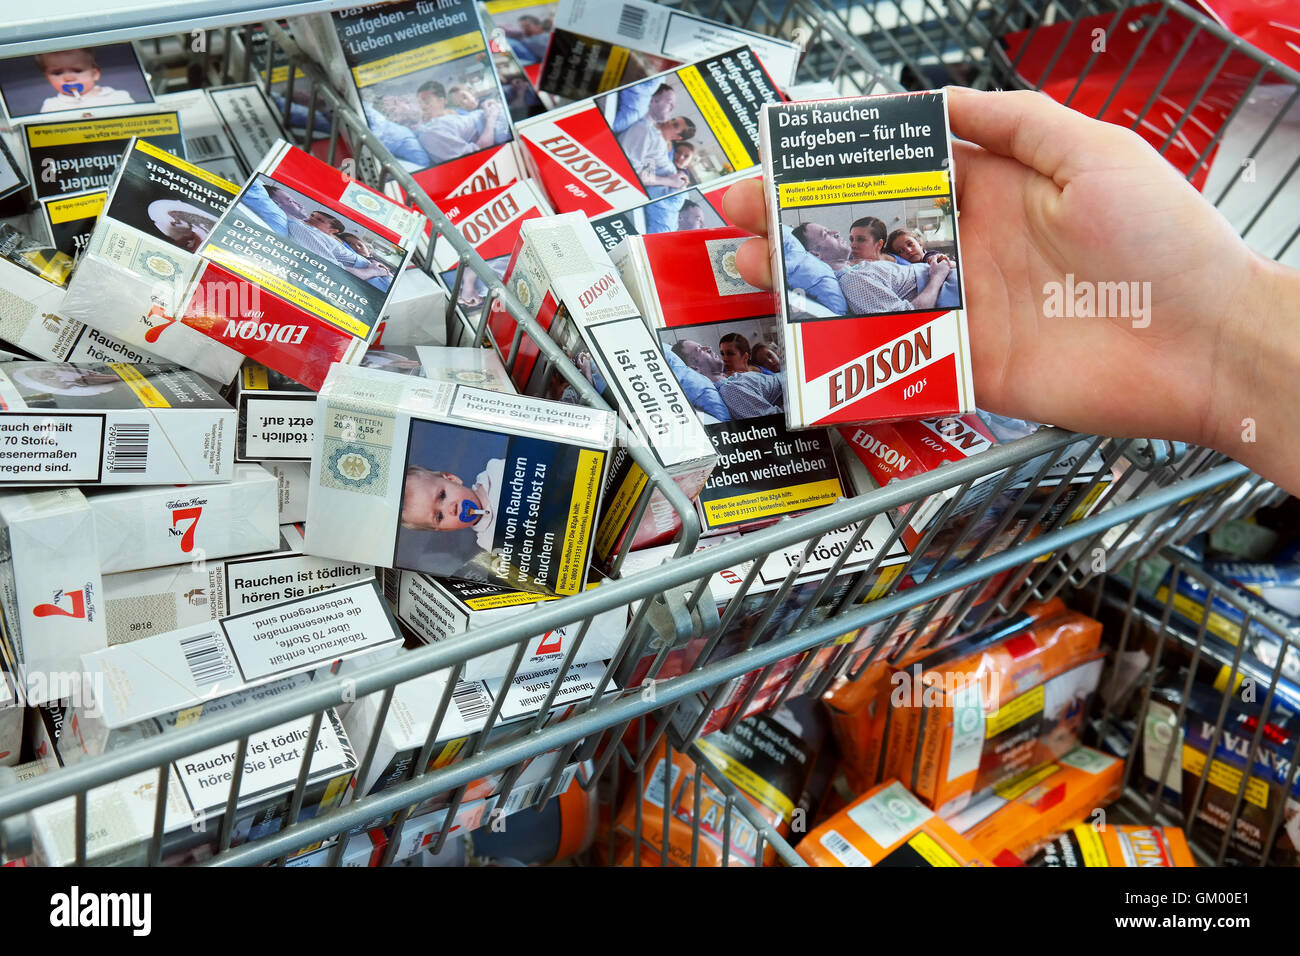 Cigarettes in an Aldi supermarket with pictures on cigarette packs to illustrate the dangers of smoking Stock Photo